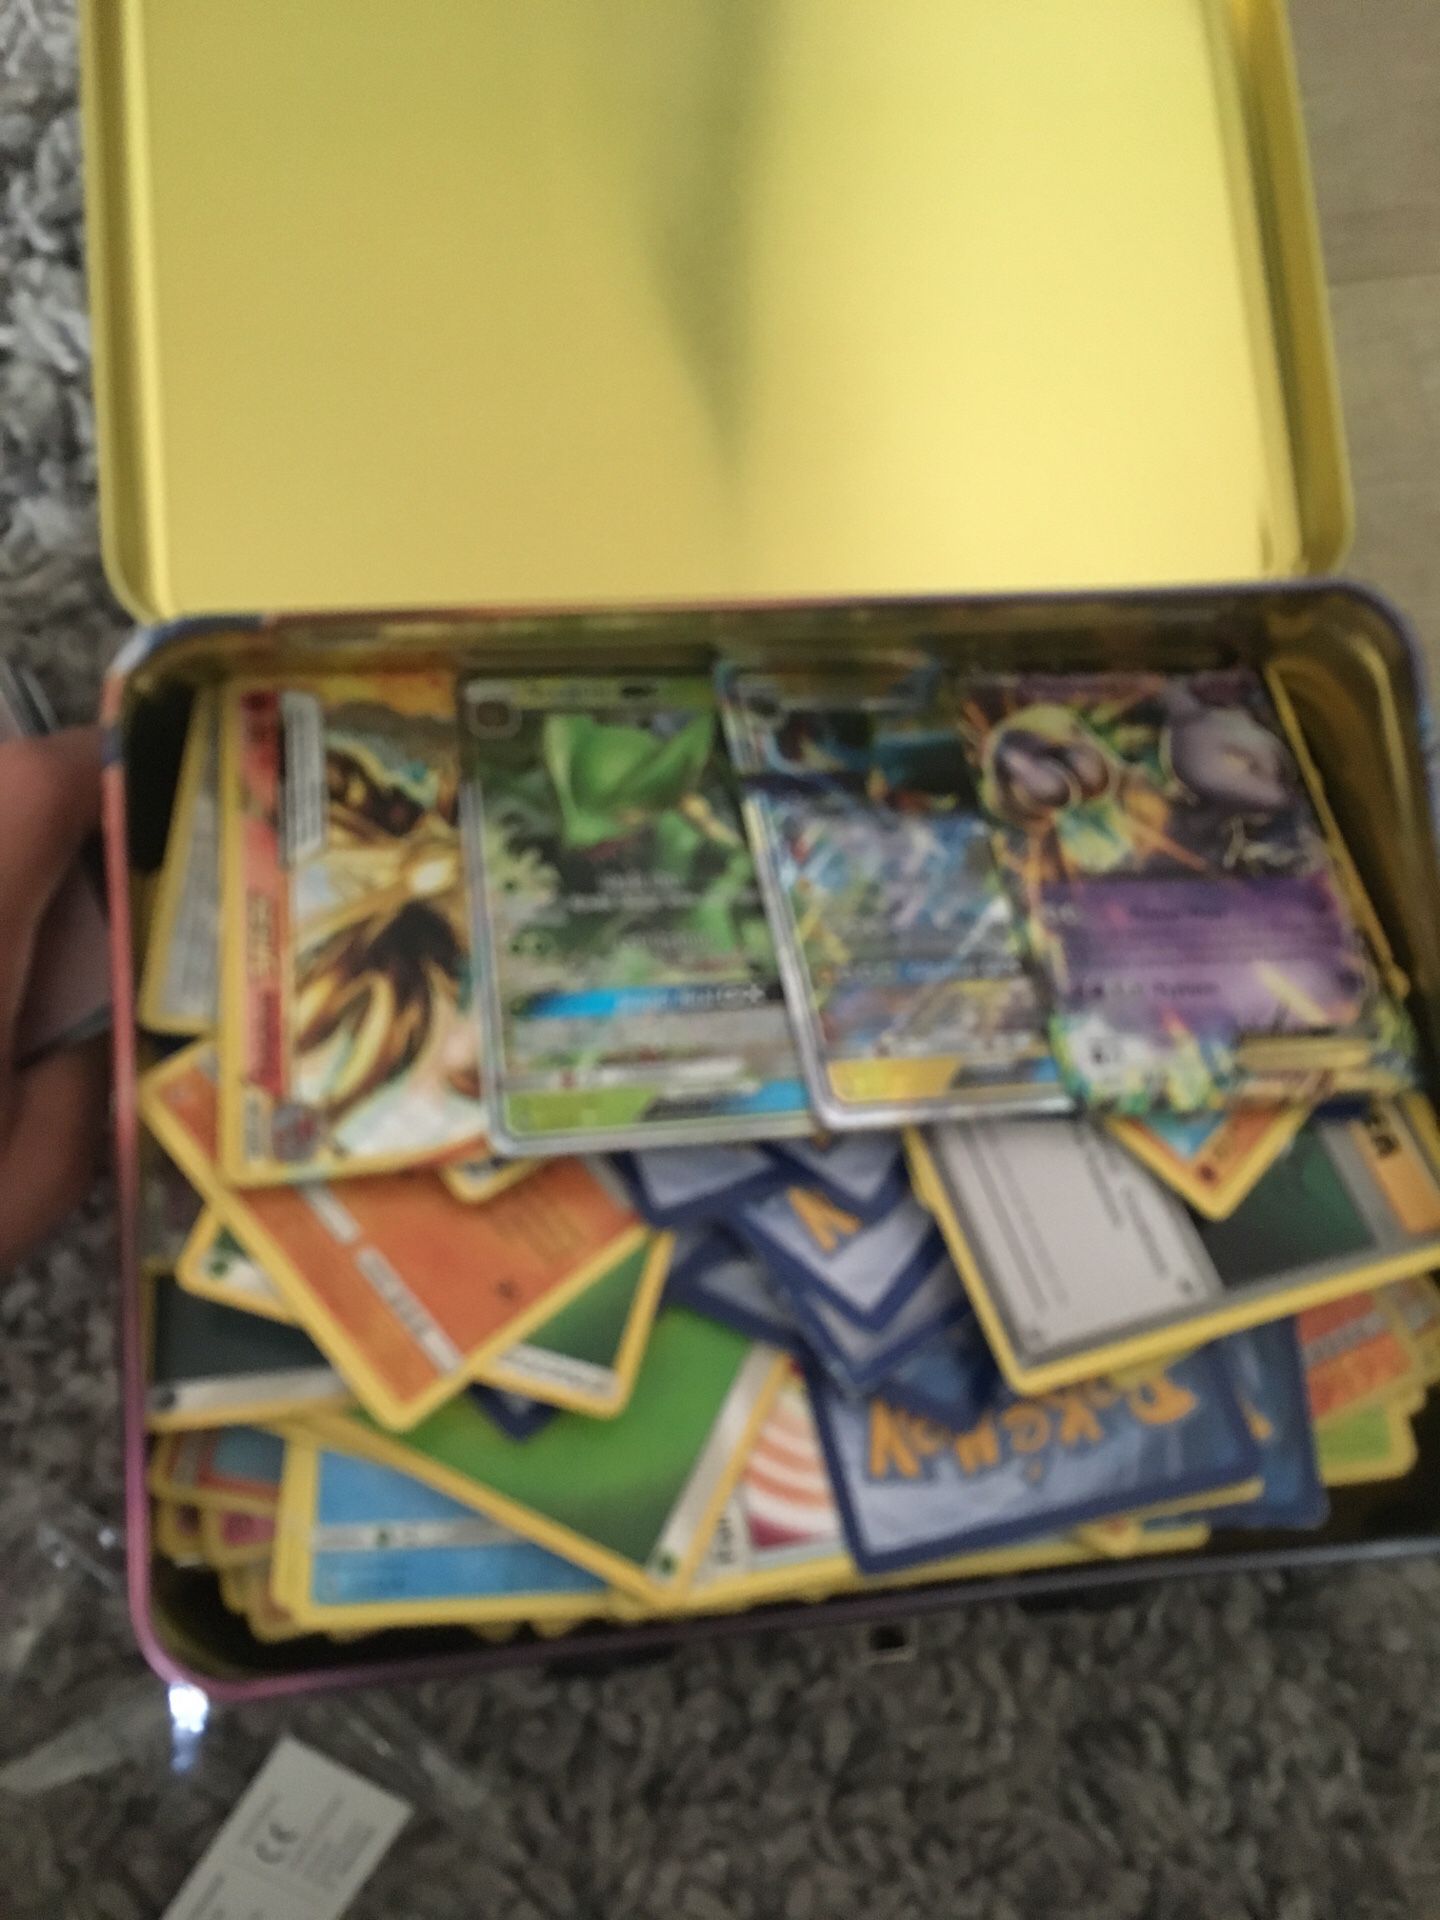 Pokemon sun and moon booster box and lunch pale filled with Pokémon cards